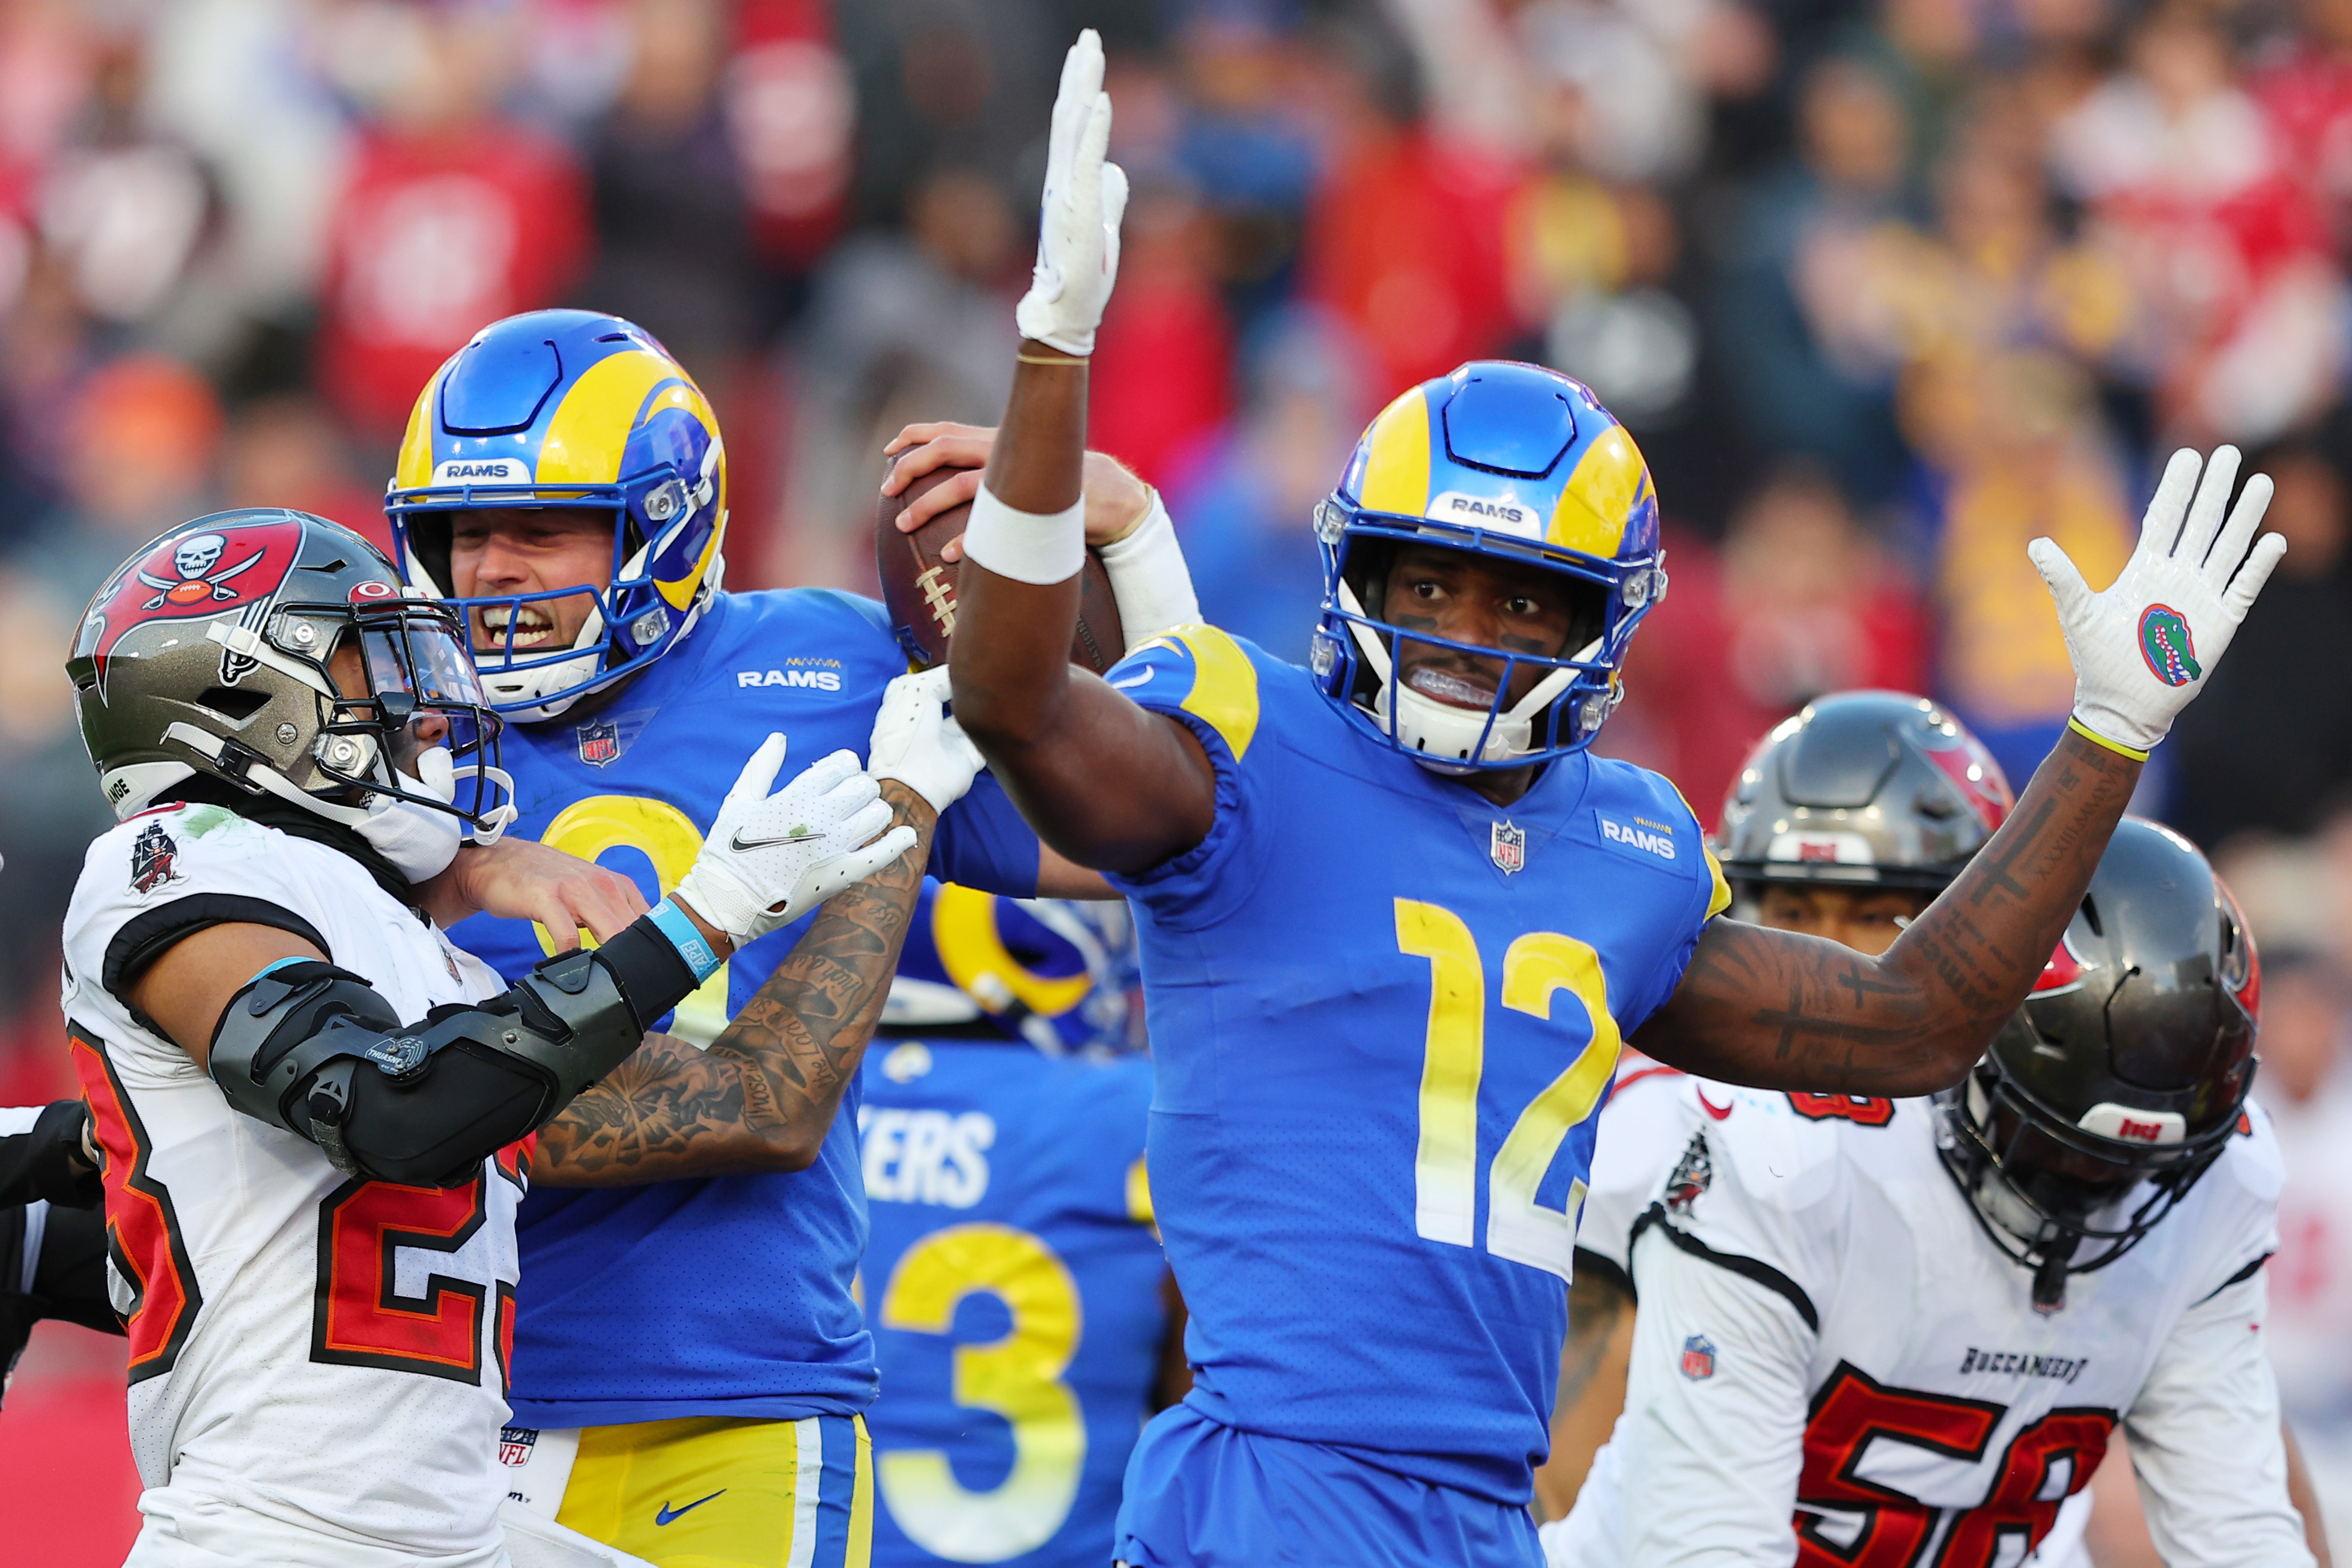 Los Angeles Rams overcome a 10-point, fourth quarter deficit to